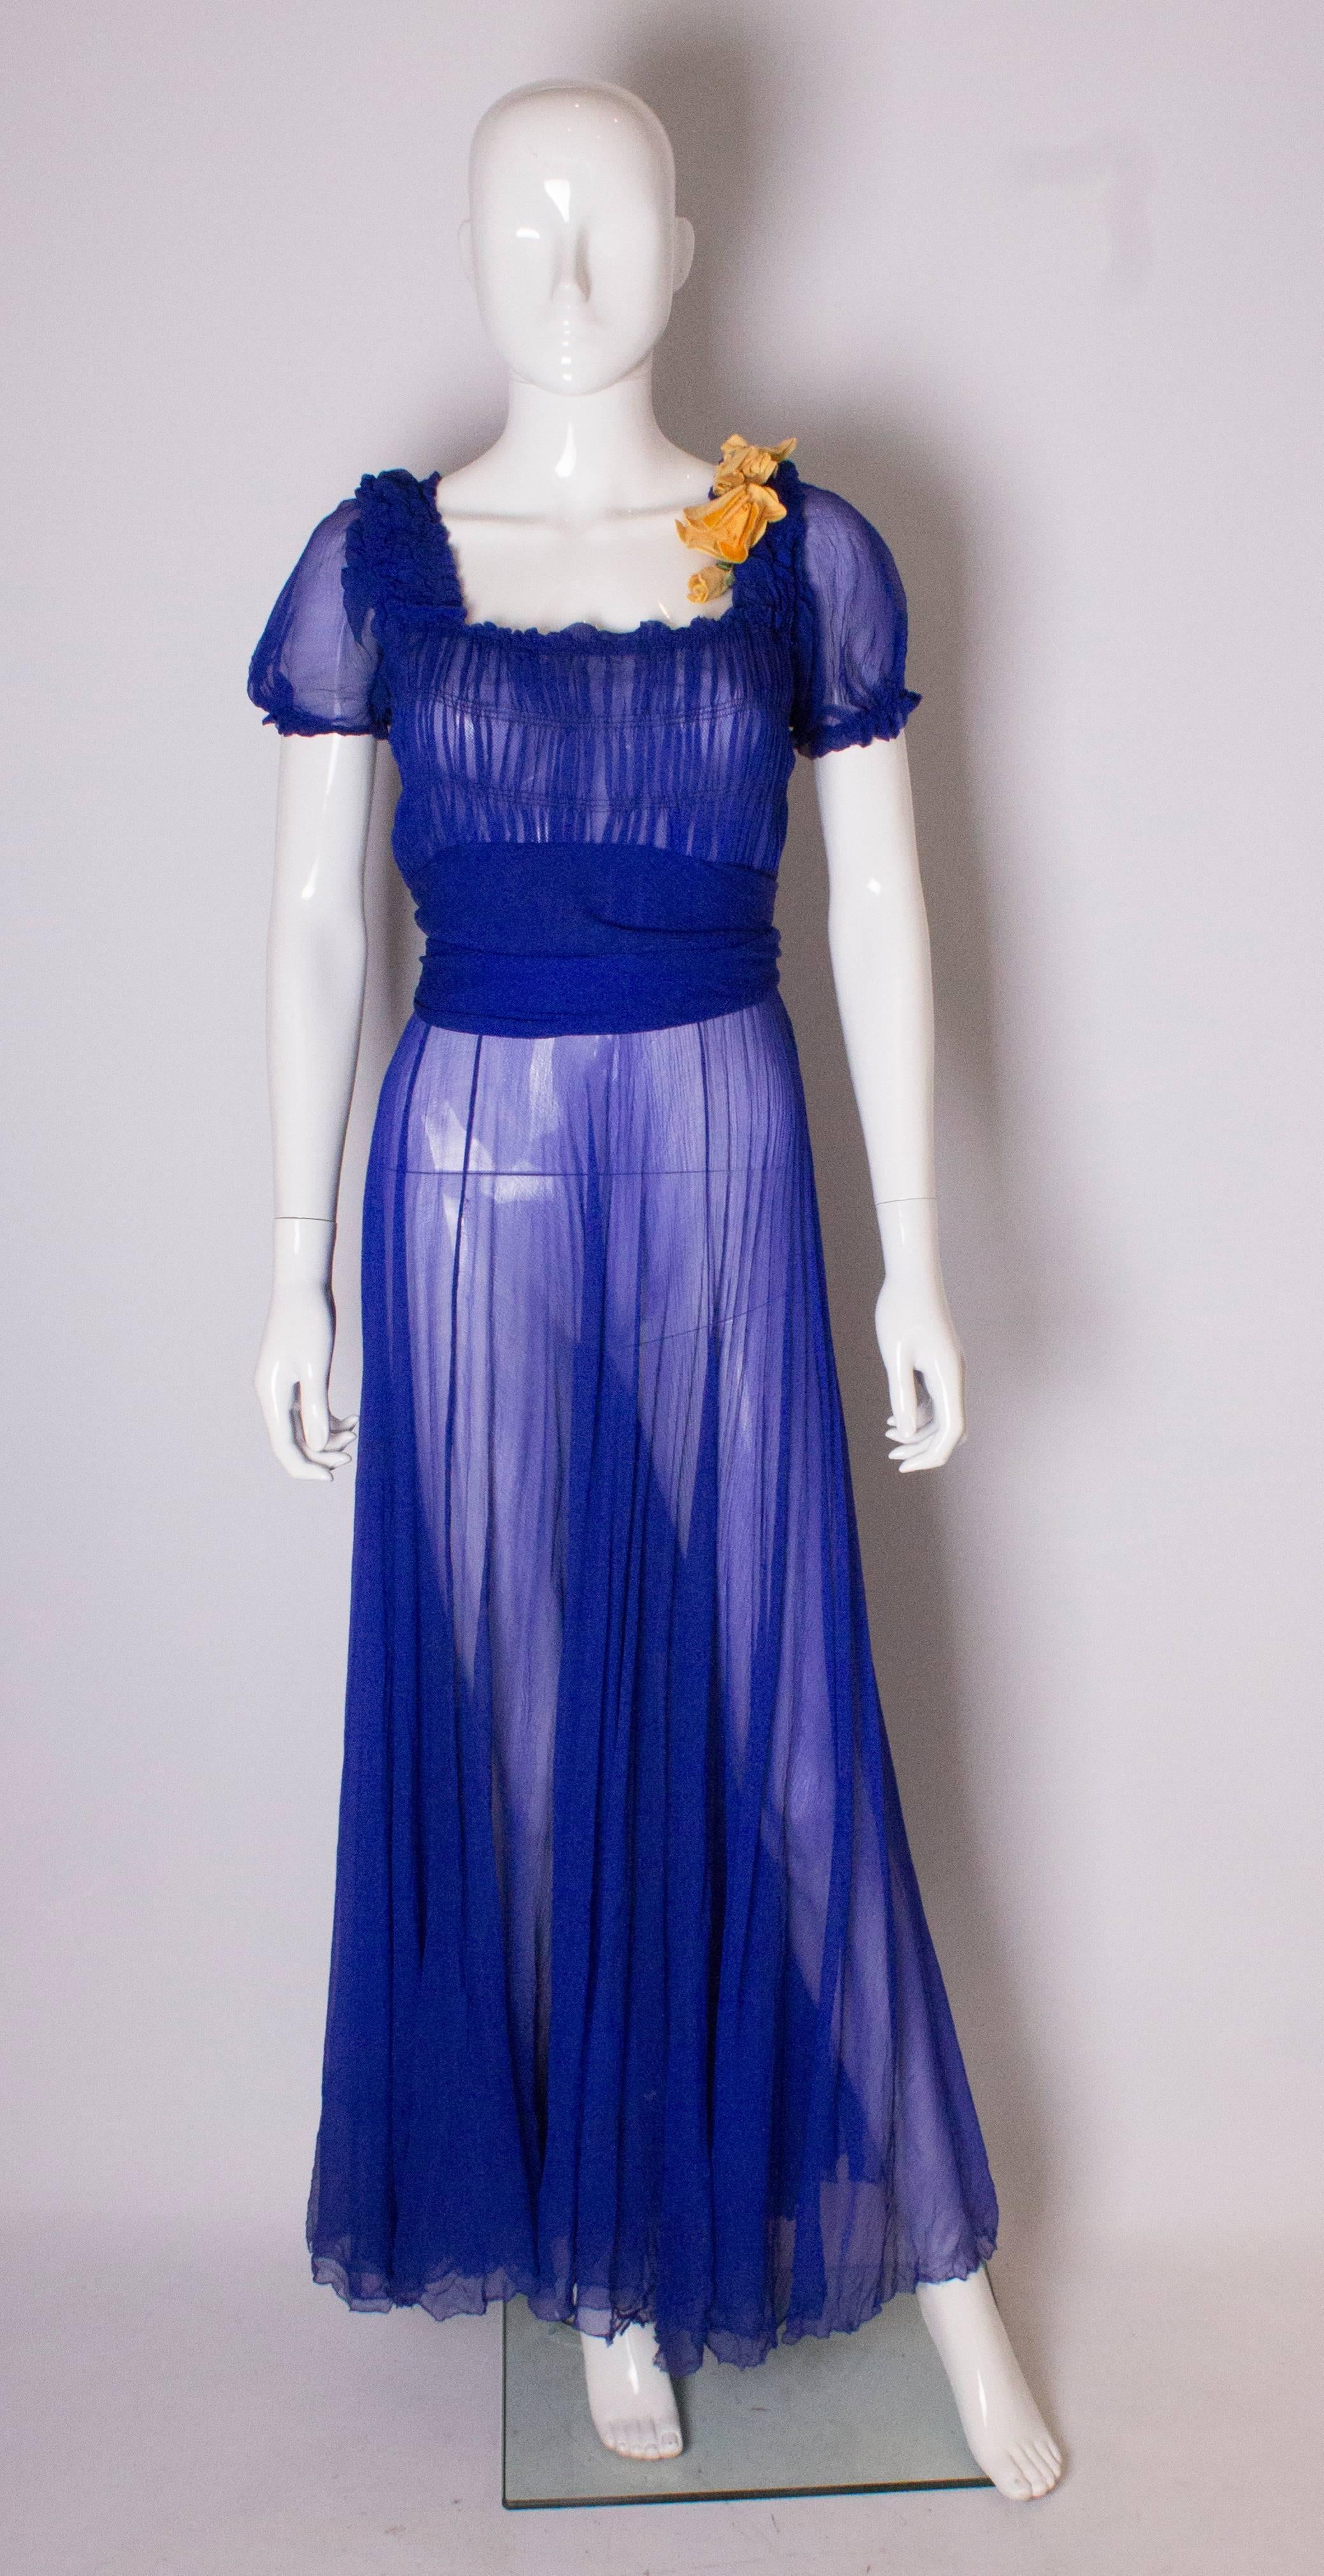 A stunning silk chiffon gown  in a wonderful vibrant blue . The gown has puff sleeves , gathering over the bust and a wide sash waistband. It has a popper opening at the side and a another layer of silk as an underskirt.